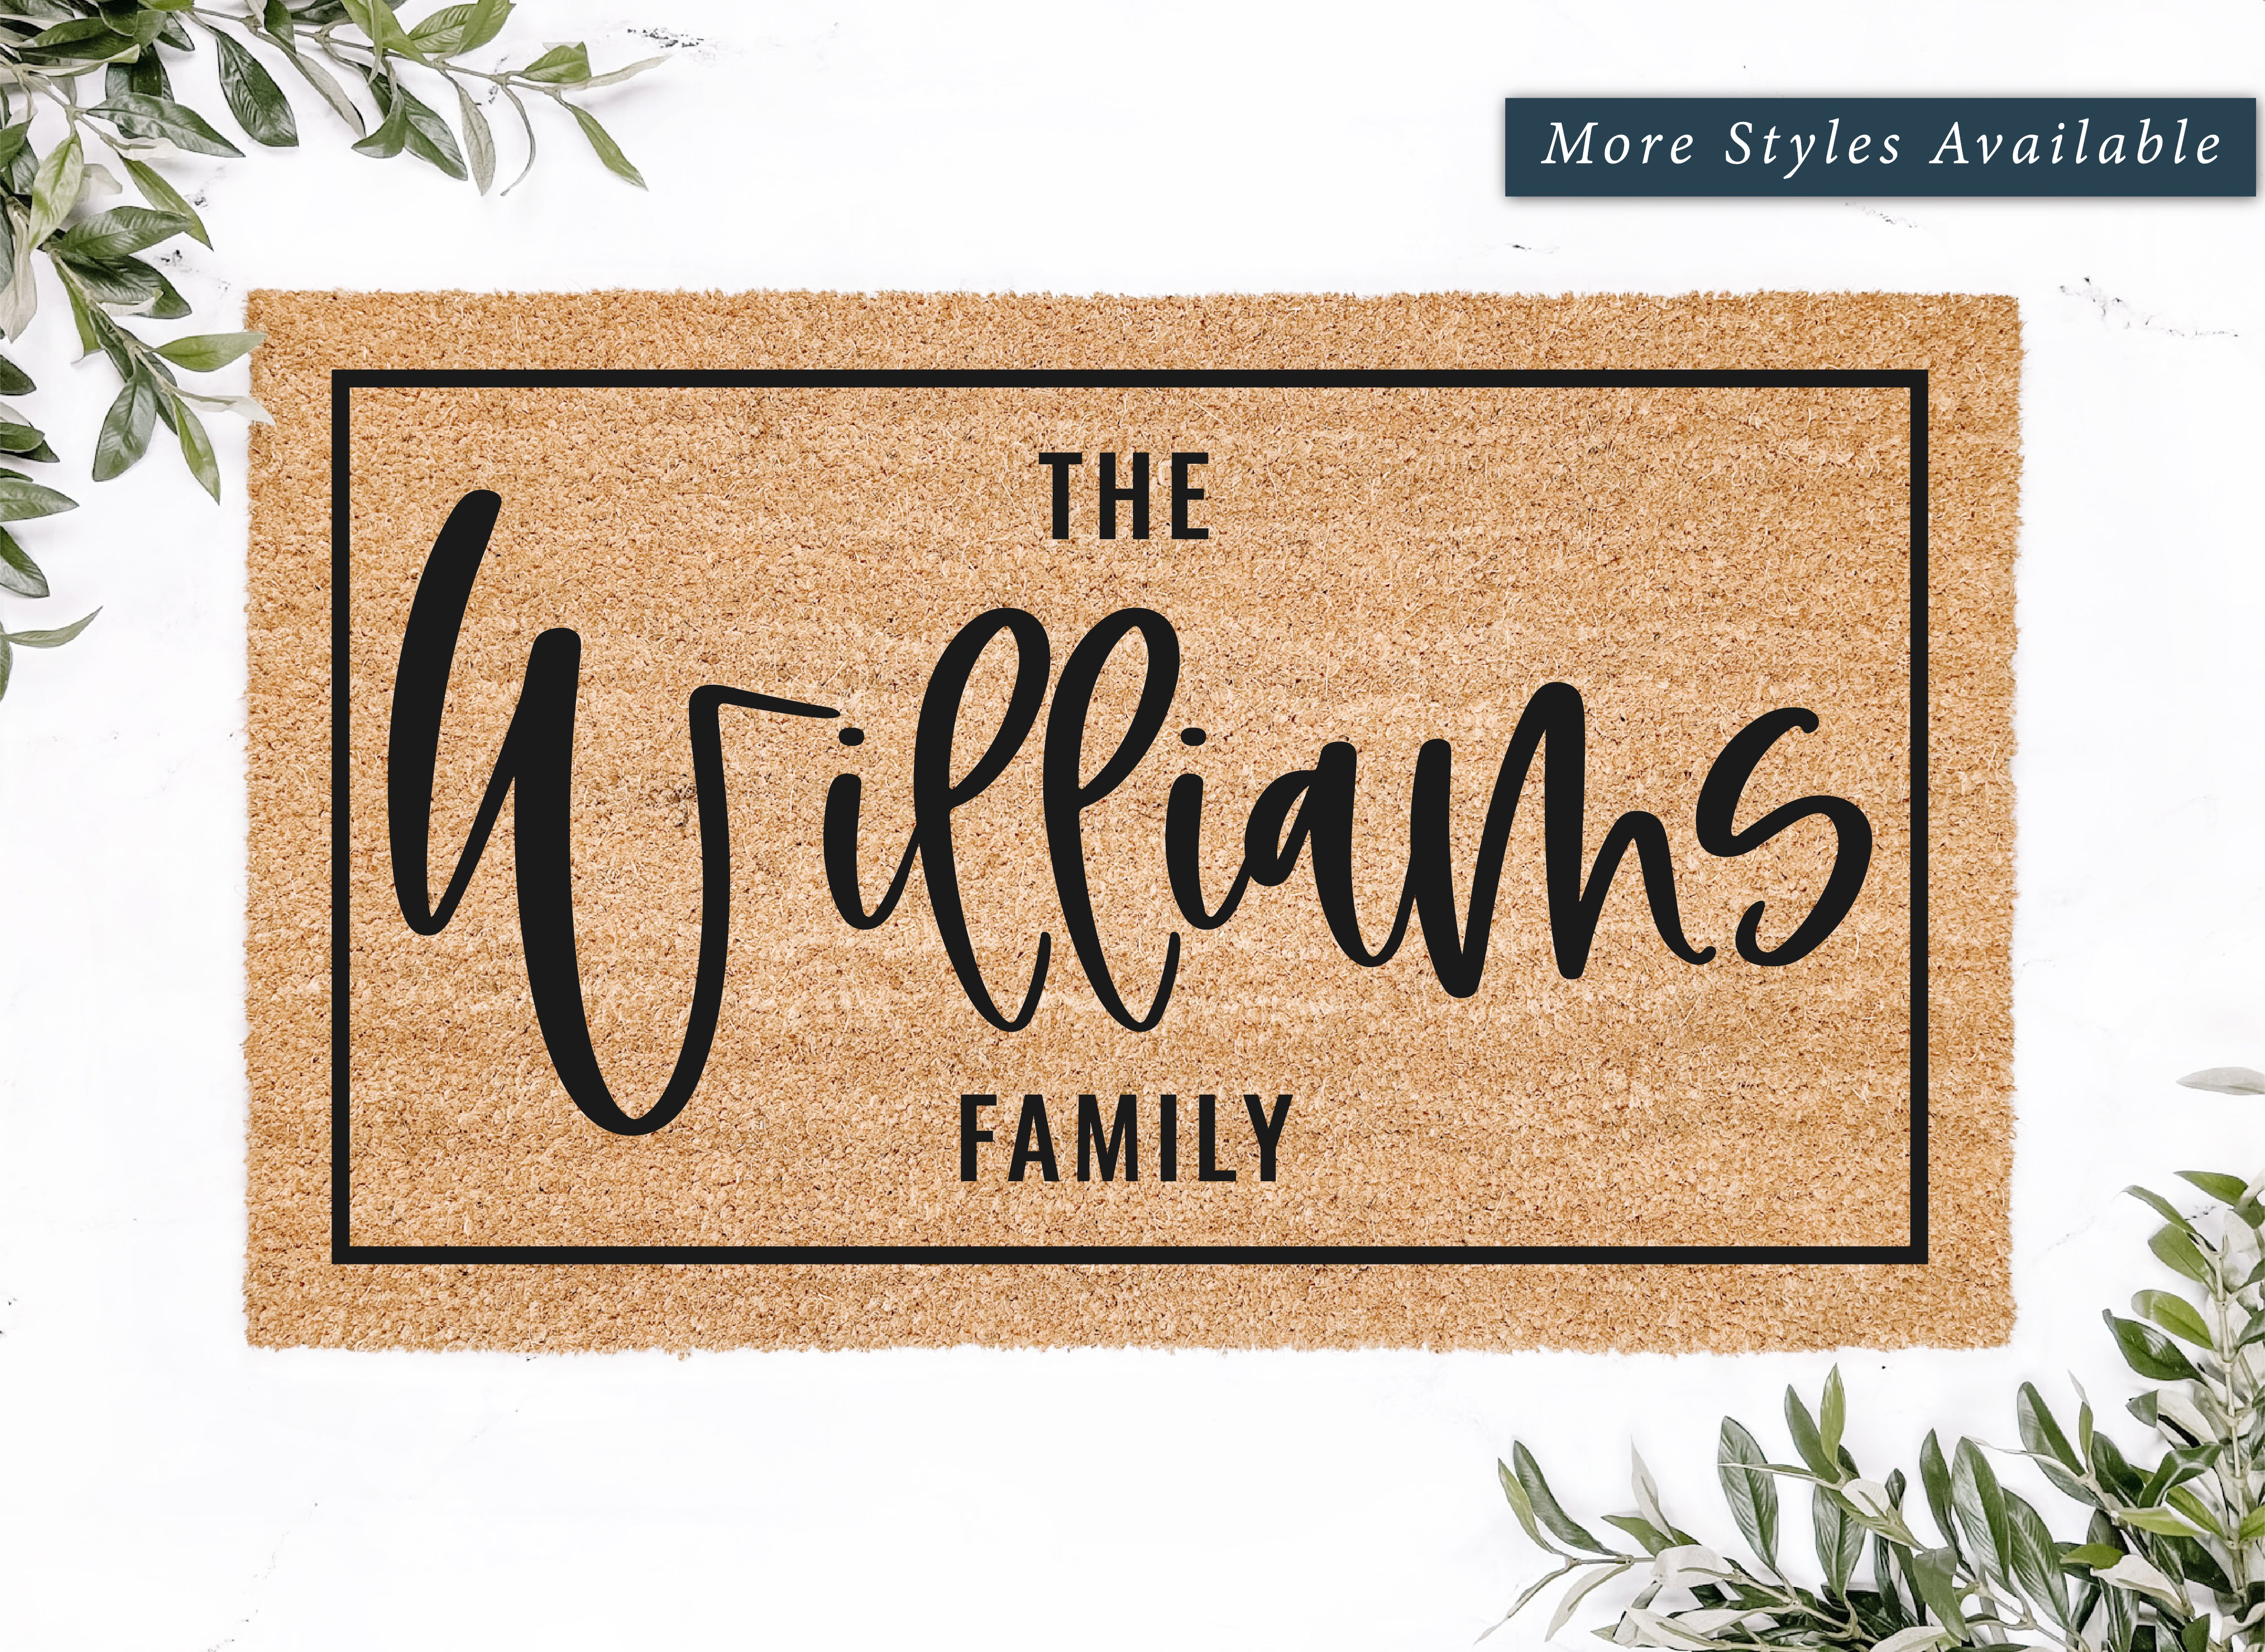 Personalized Family Border Doormat